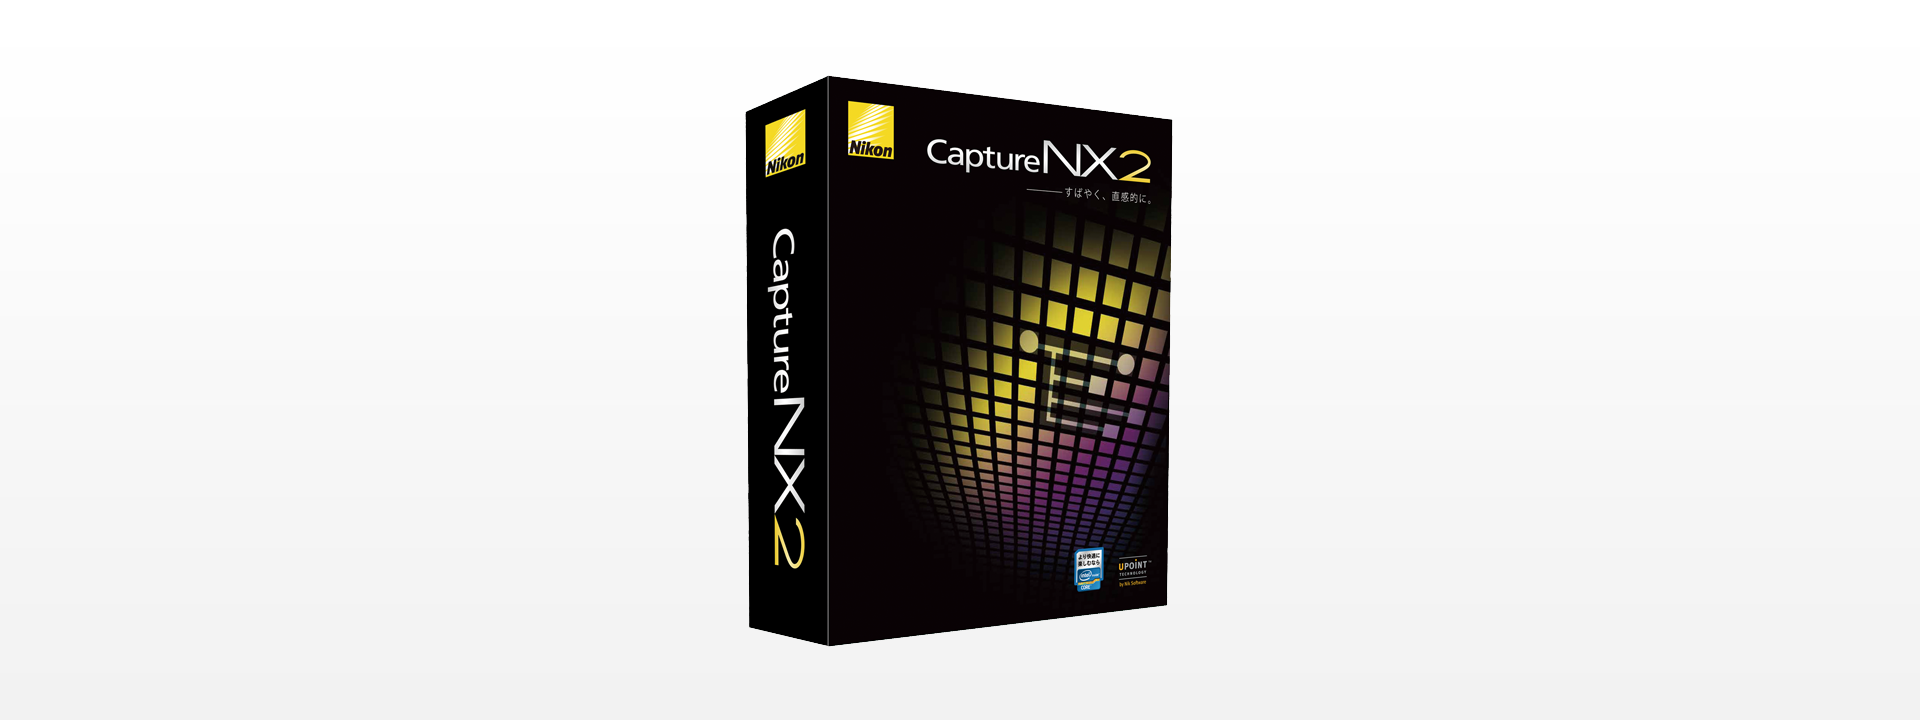 PC/タブレット その他 Capture NX 2 - 概要 | ソフトウェア・アプリ | ニコンイメージング